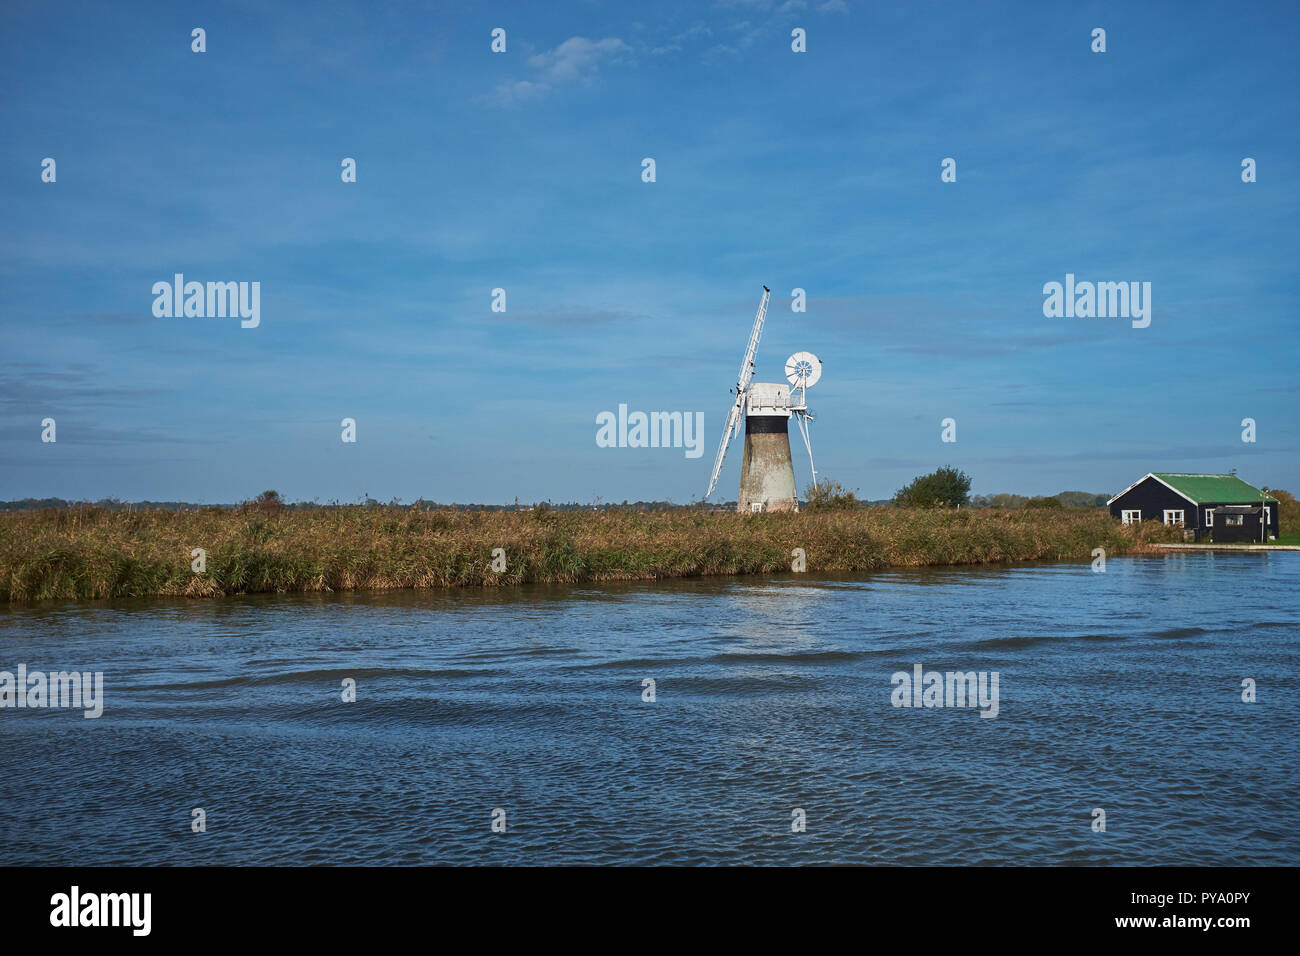 A disused windmill next to the River Thurne on a clear autumn day Norfolk Broads, Norfolk, England, UK Stock Photo